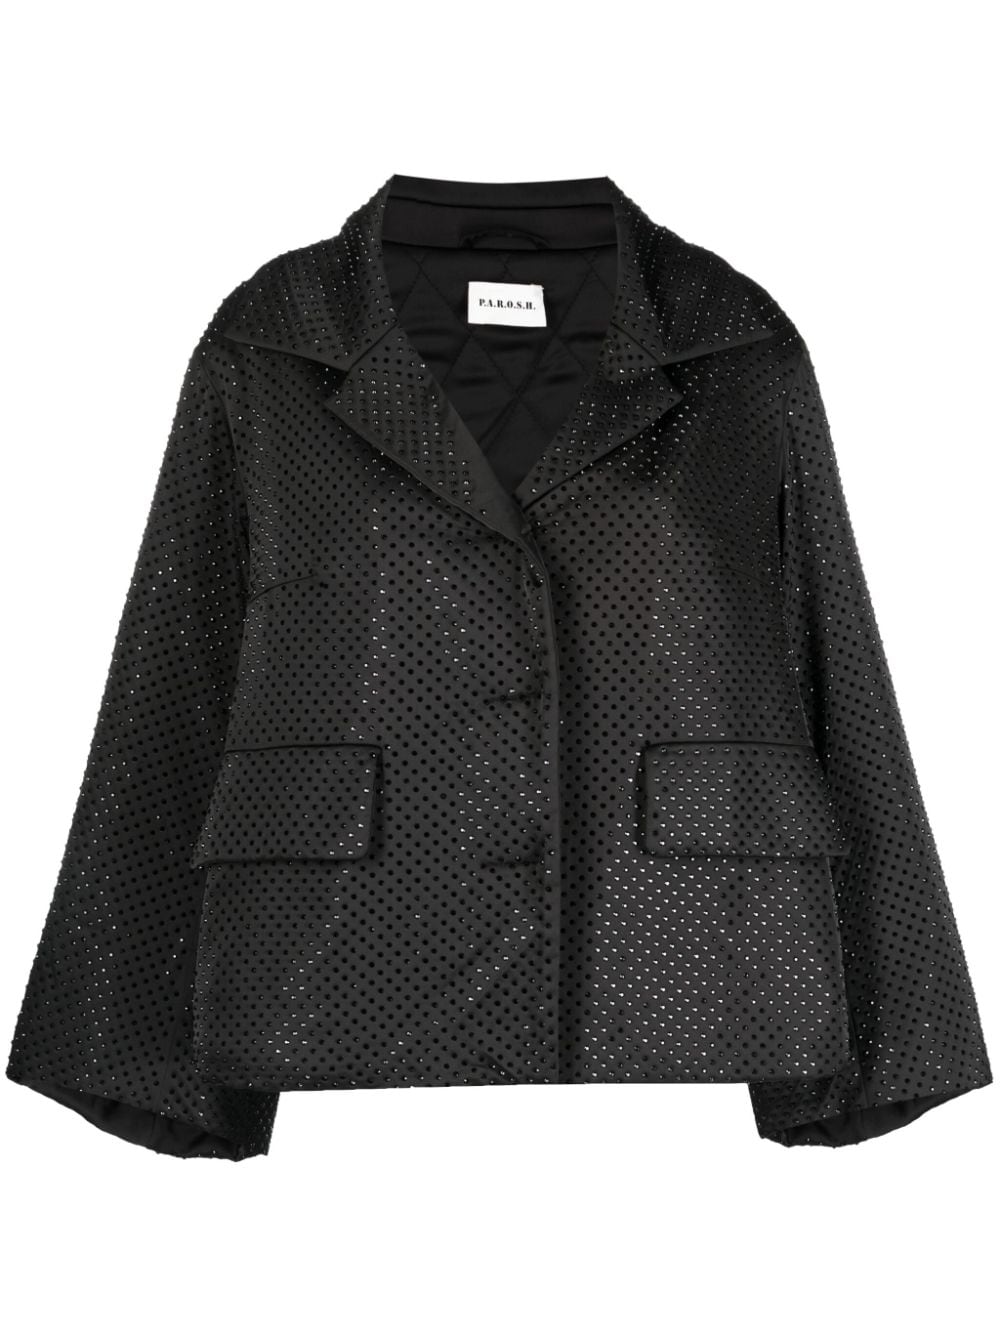 P.A.R.O.S.H. crystal-embellished notched-lapel jacket - Black von P.A.R.O.S.H.